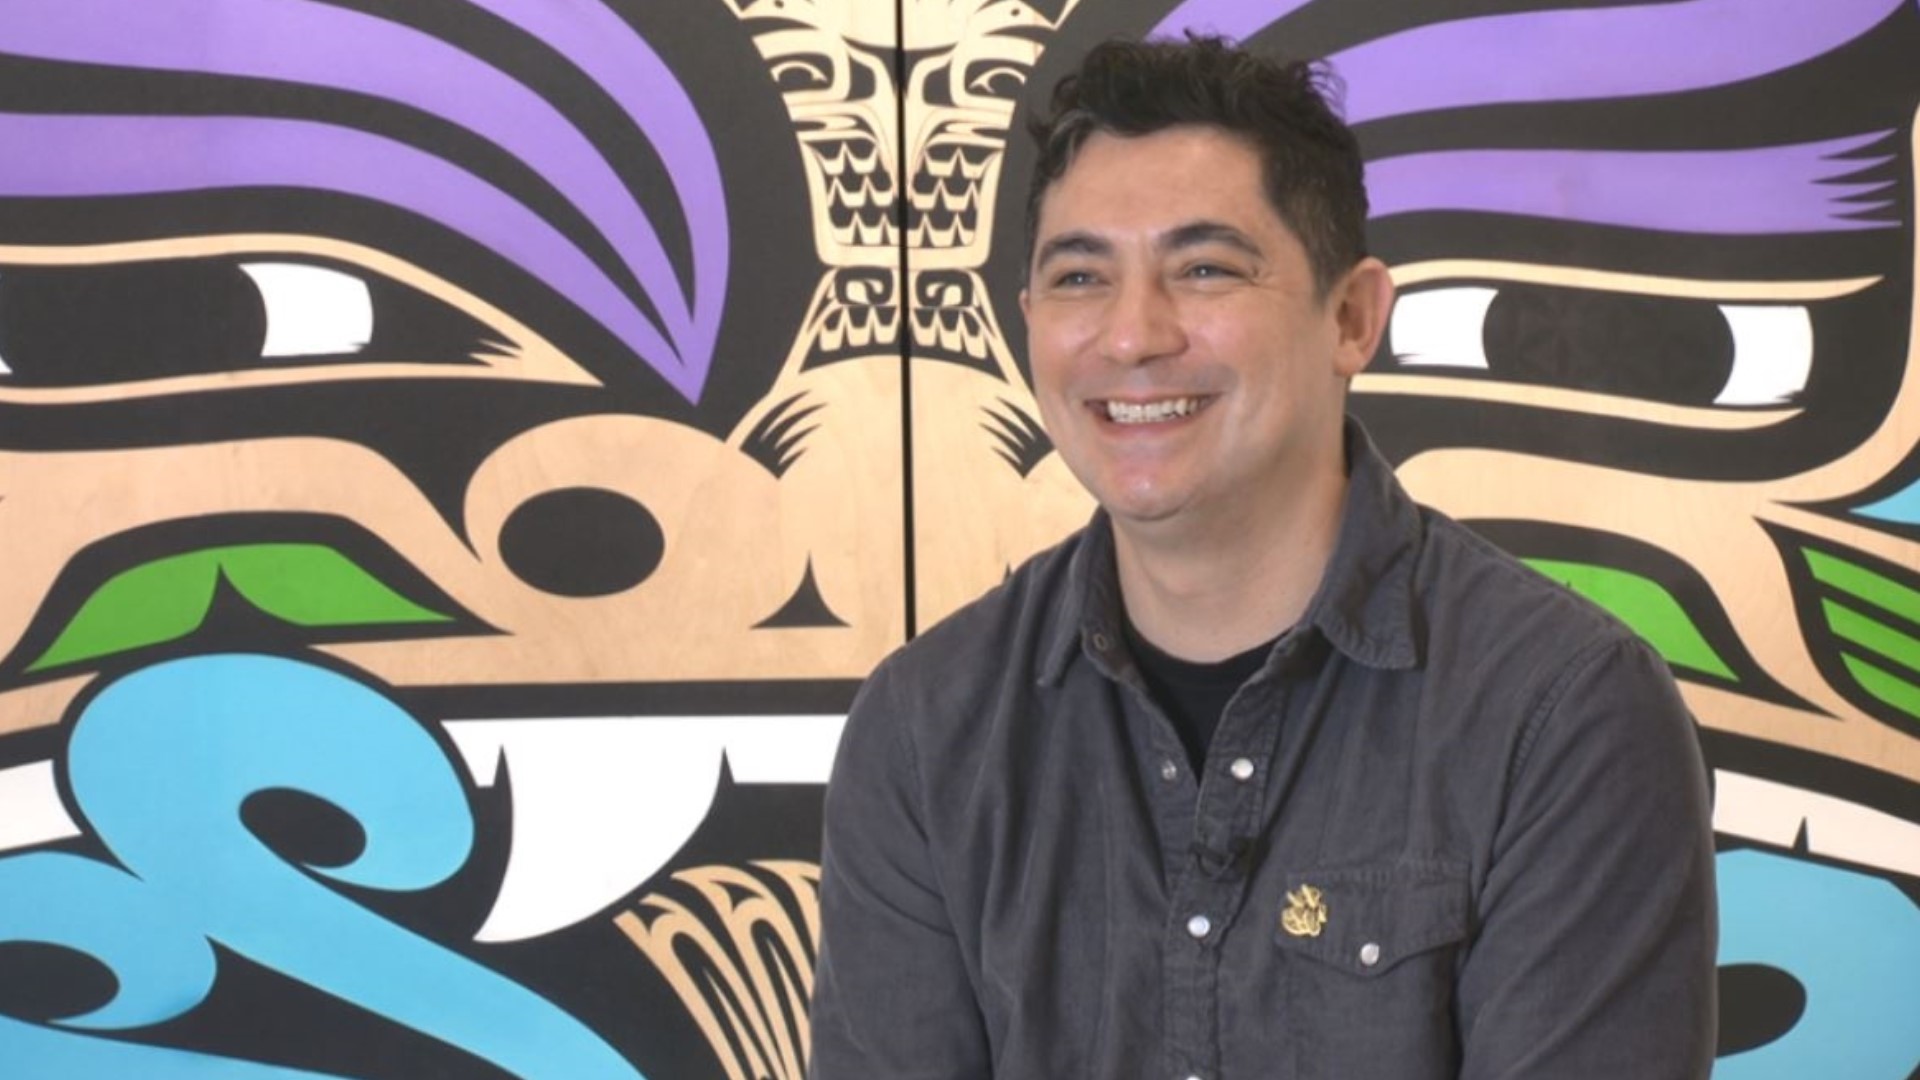 The company he founded, Eighth Generation, also opened the door for countless other Indigenous creatives to make a living through art. #k5evening